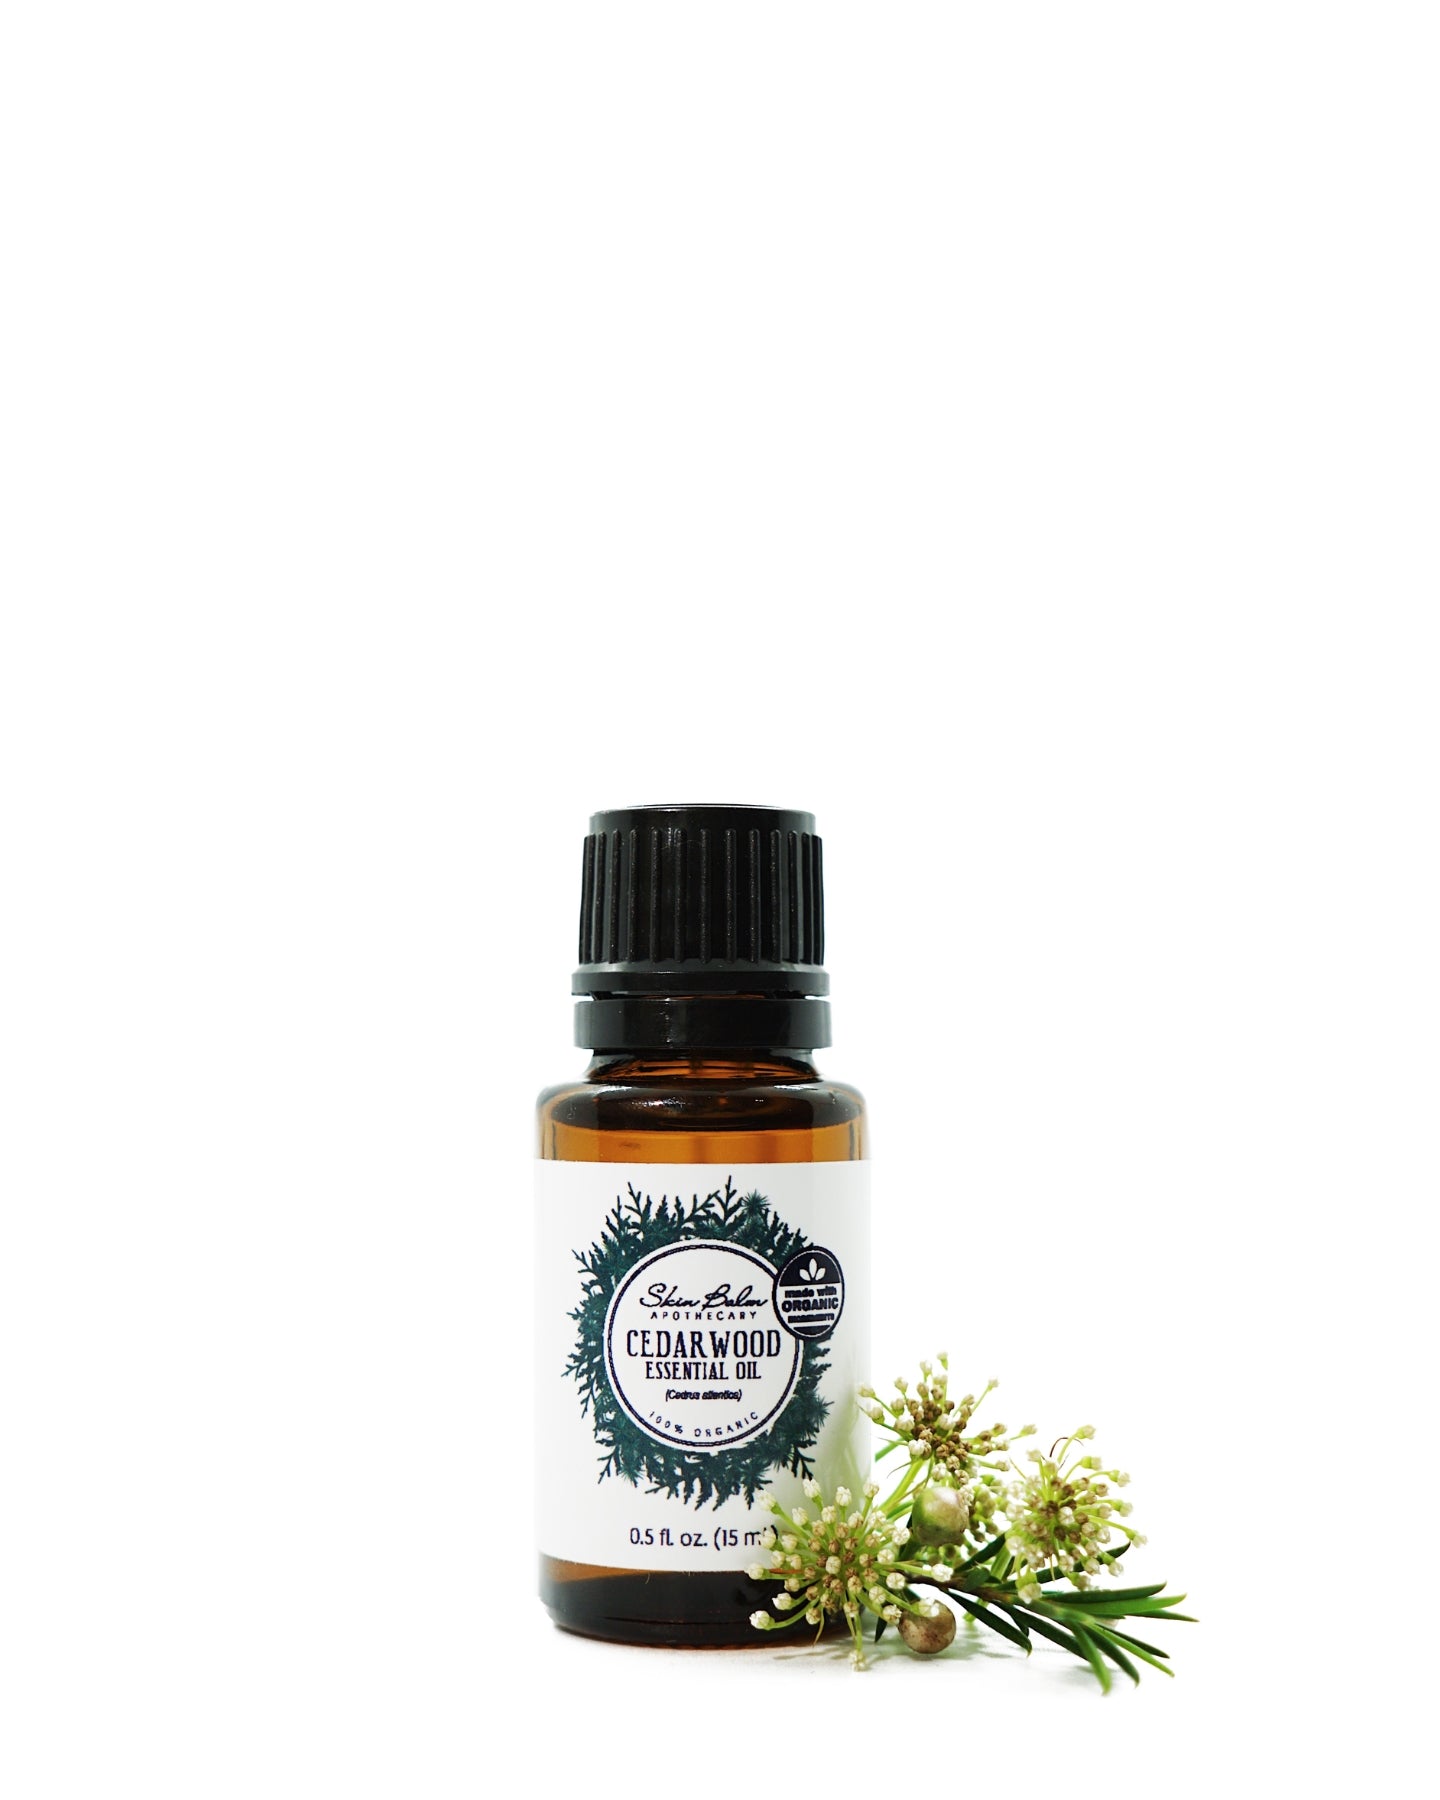 Organic Cedarwood Essential Oil with an evergreen stem against a white background.